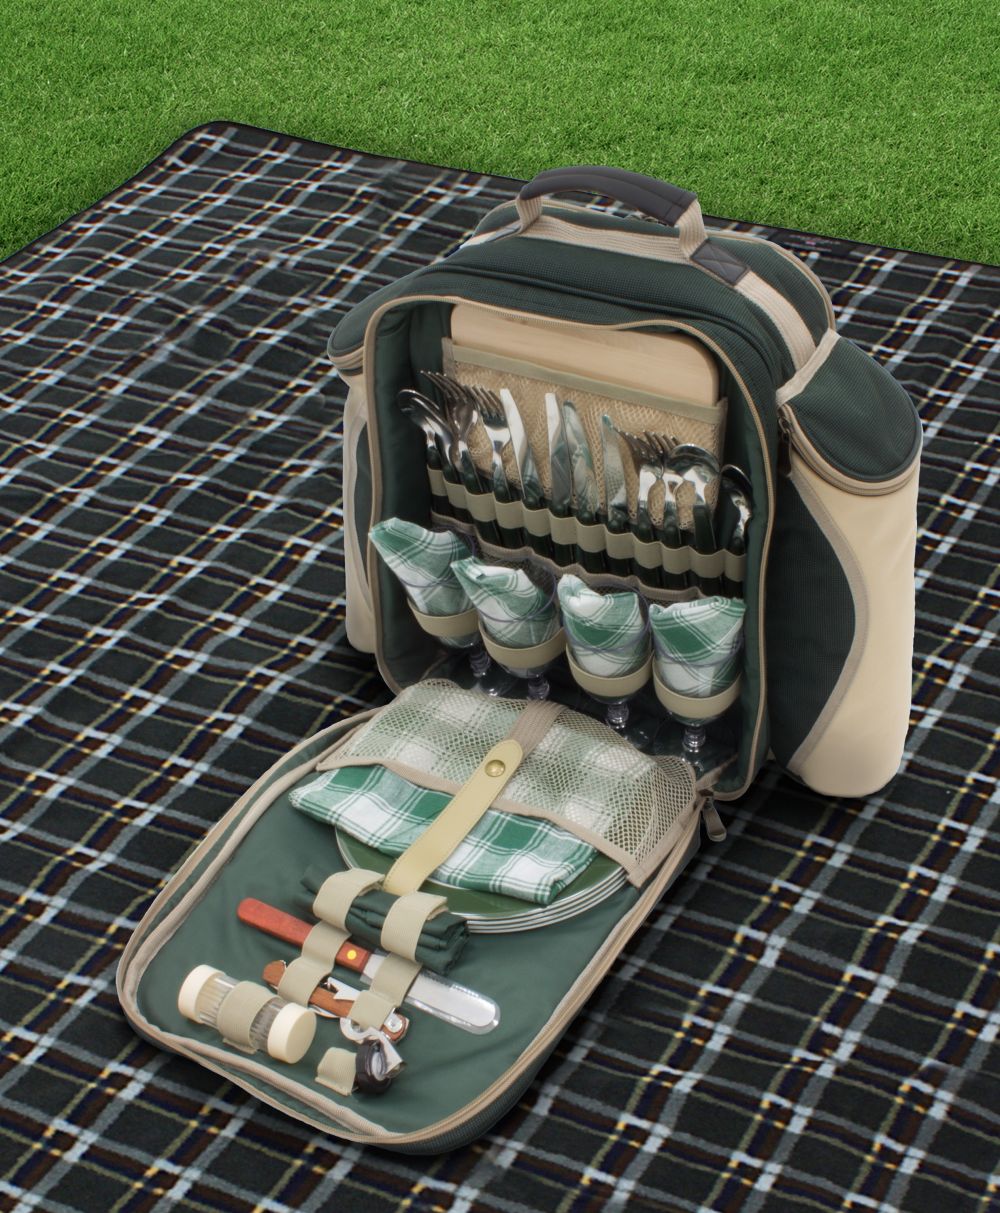 Greenfield Collection Super Deluxe Picnic Backpack Hamper for Four People with Matching Picnic Blanket - The Greenfield Collection